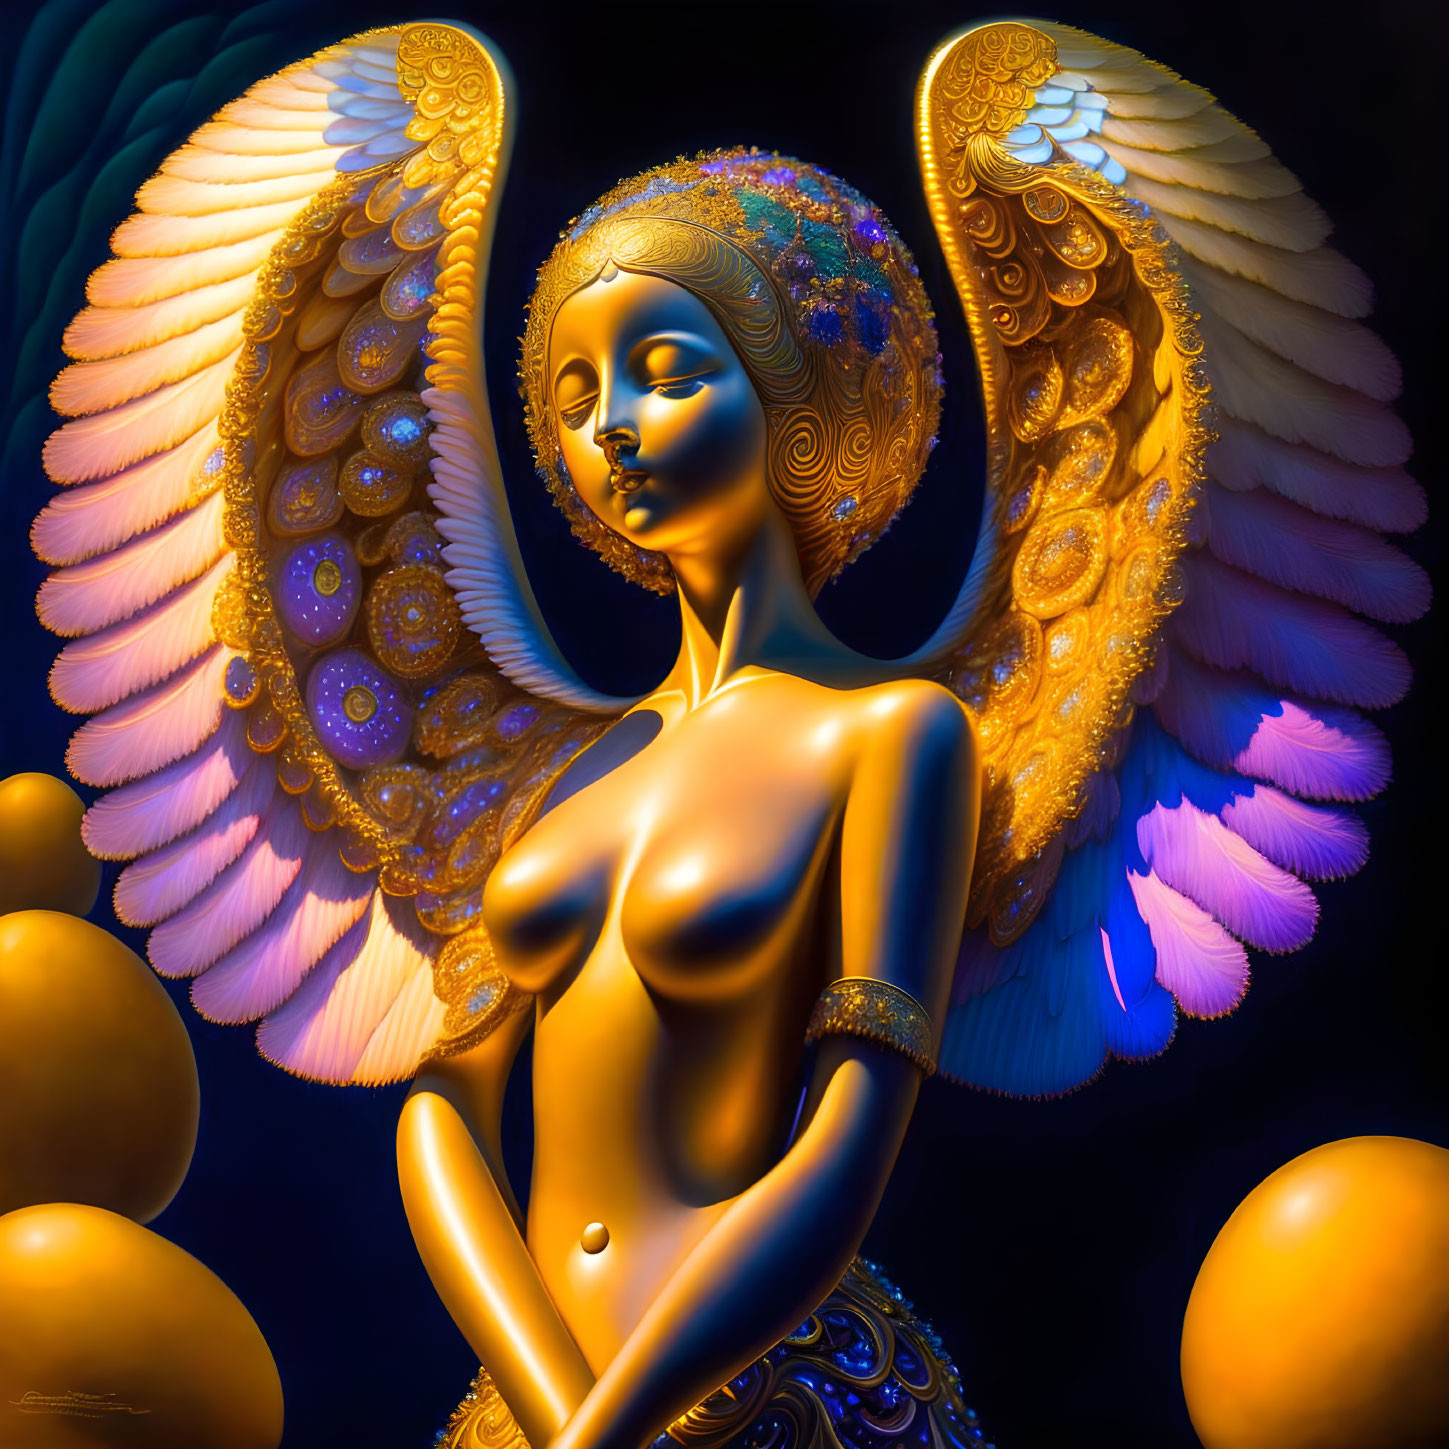 Golden humanoid figure with wings and halo in surreal setting.